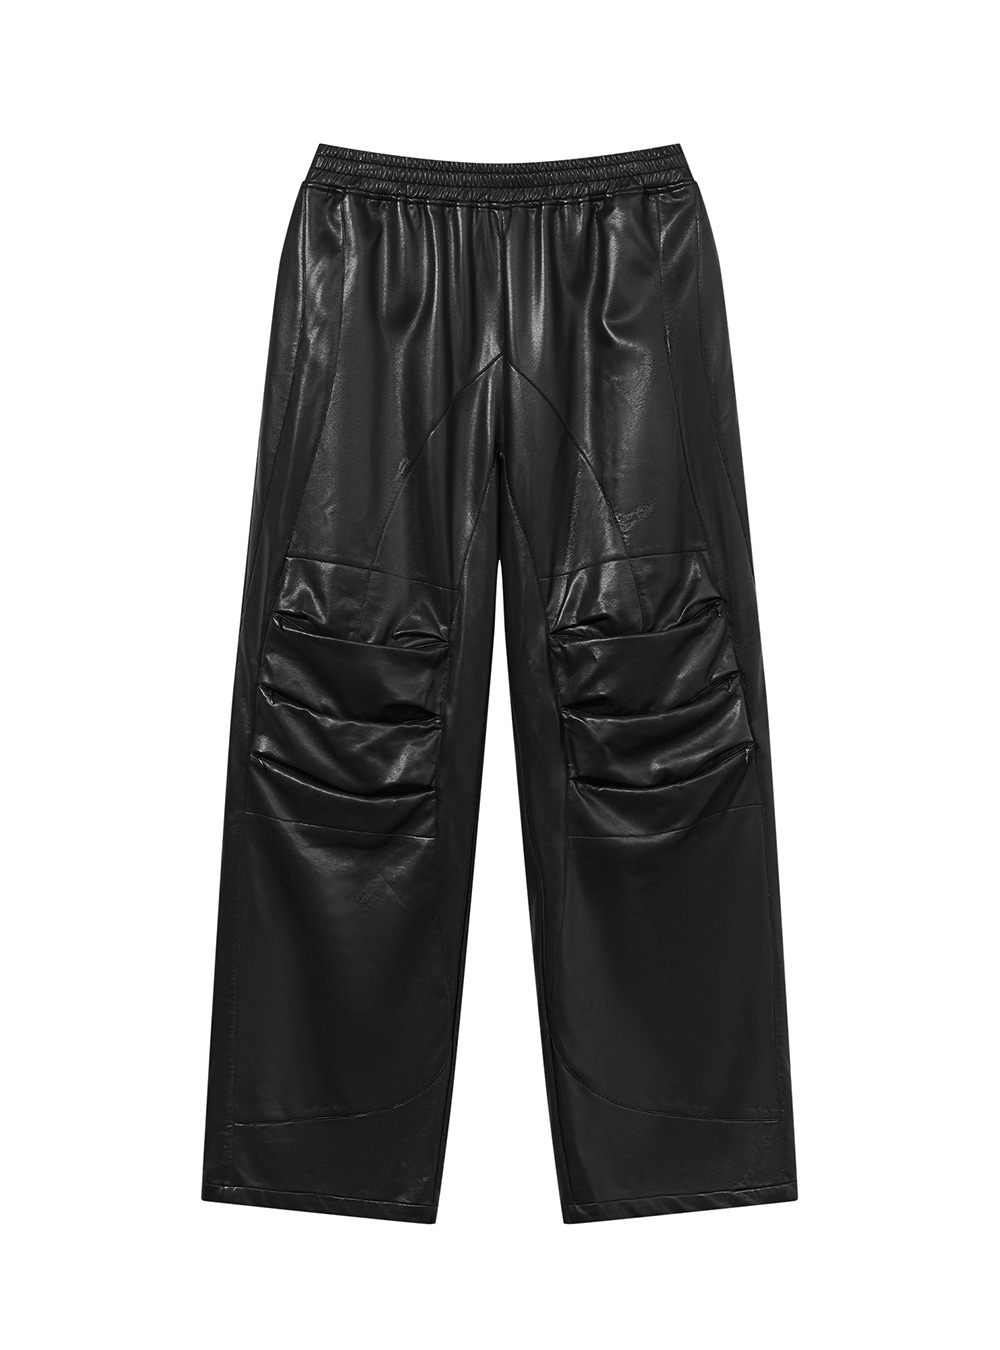 [BLIND NO PLAN] leather pleated zipper pants